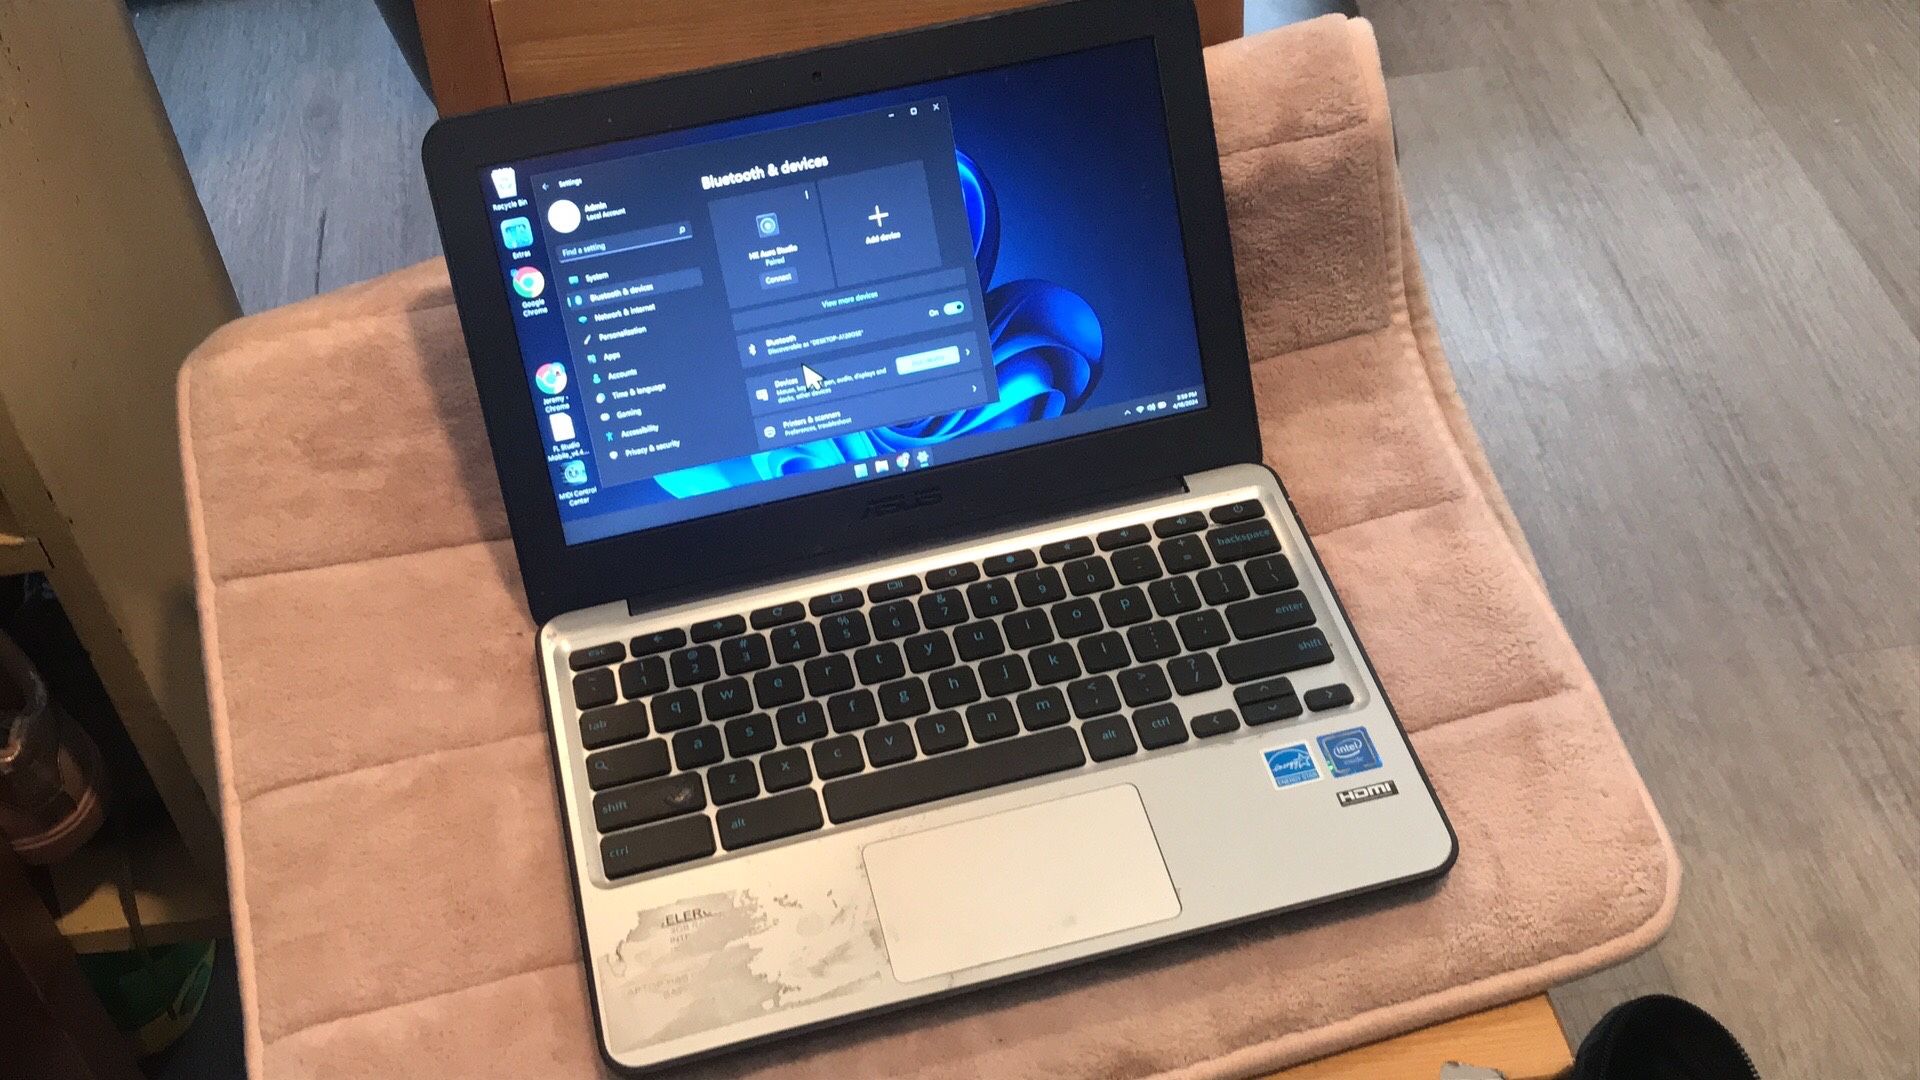 ASUS Chromebook Modified With Win 11installed i3,